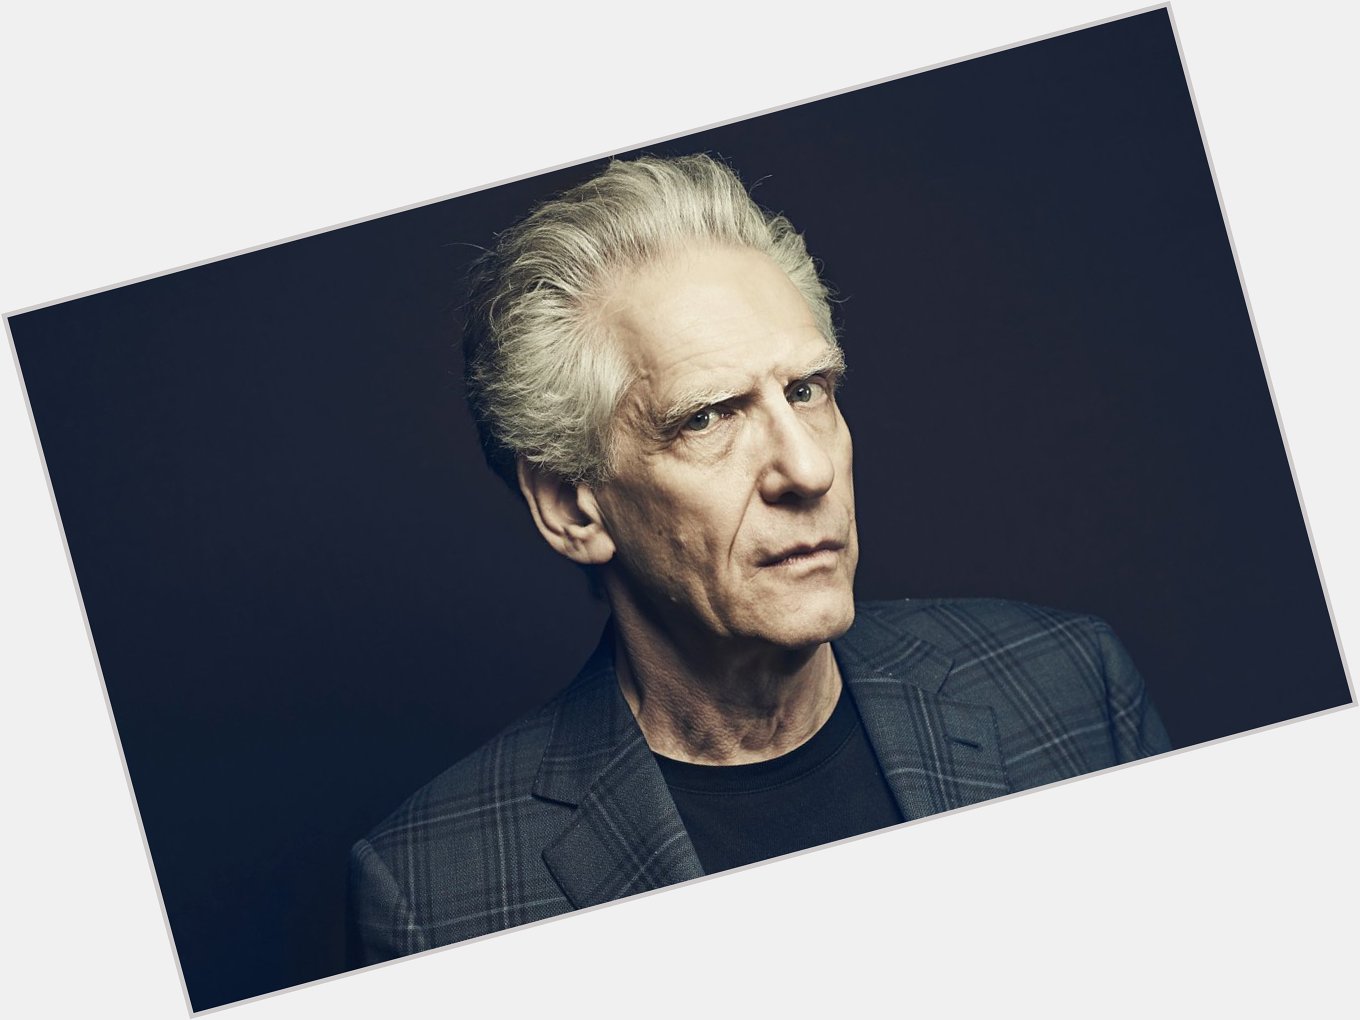 Happy Birthday to DAVID CRONENBERG (THE FLY, SCANNERS, VIDEODROME) who turns 74 today 